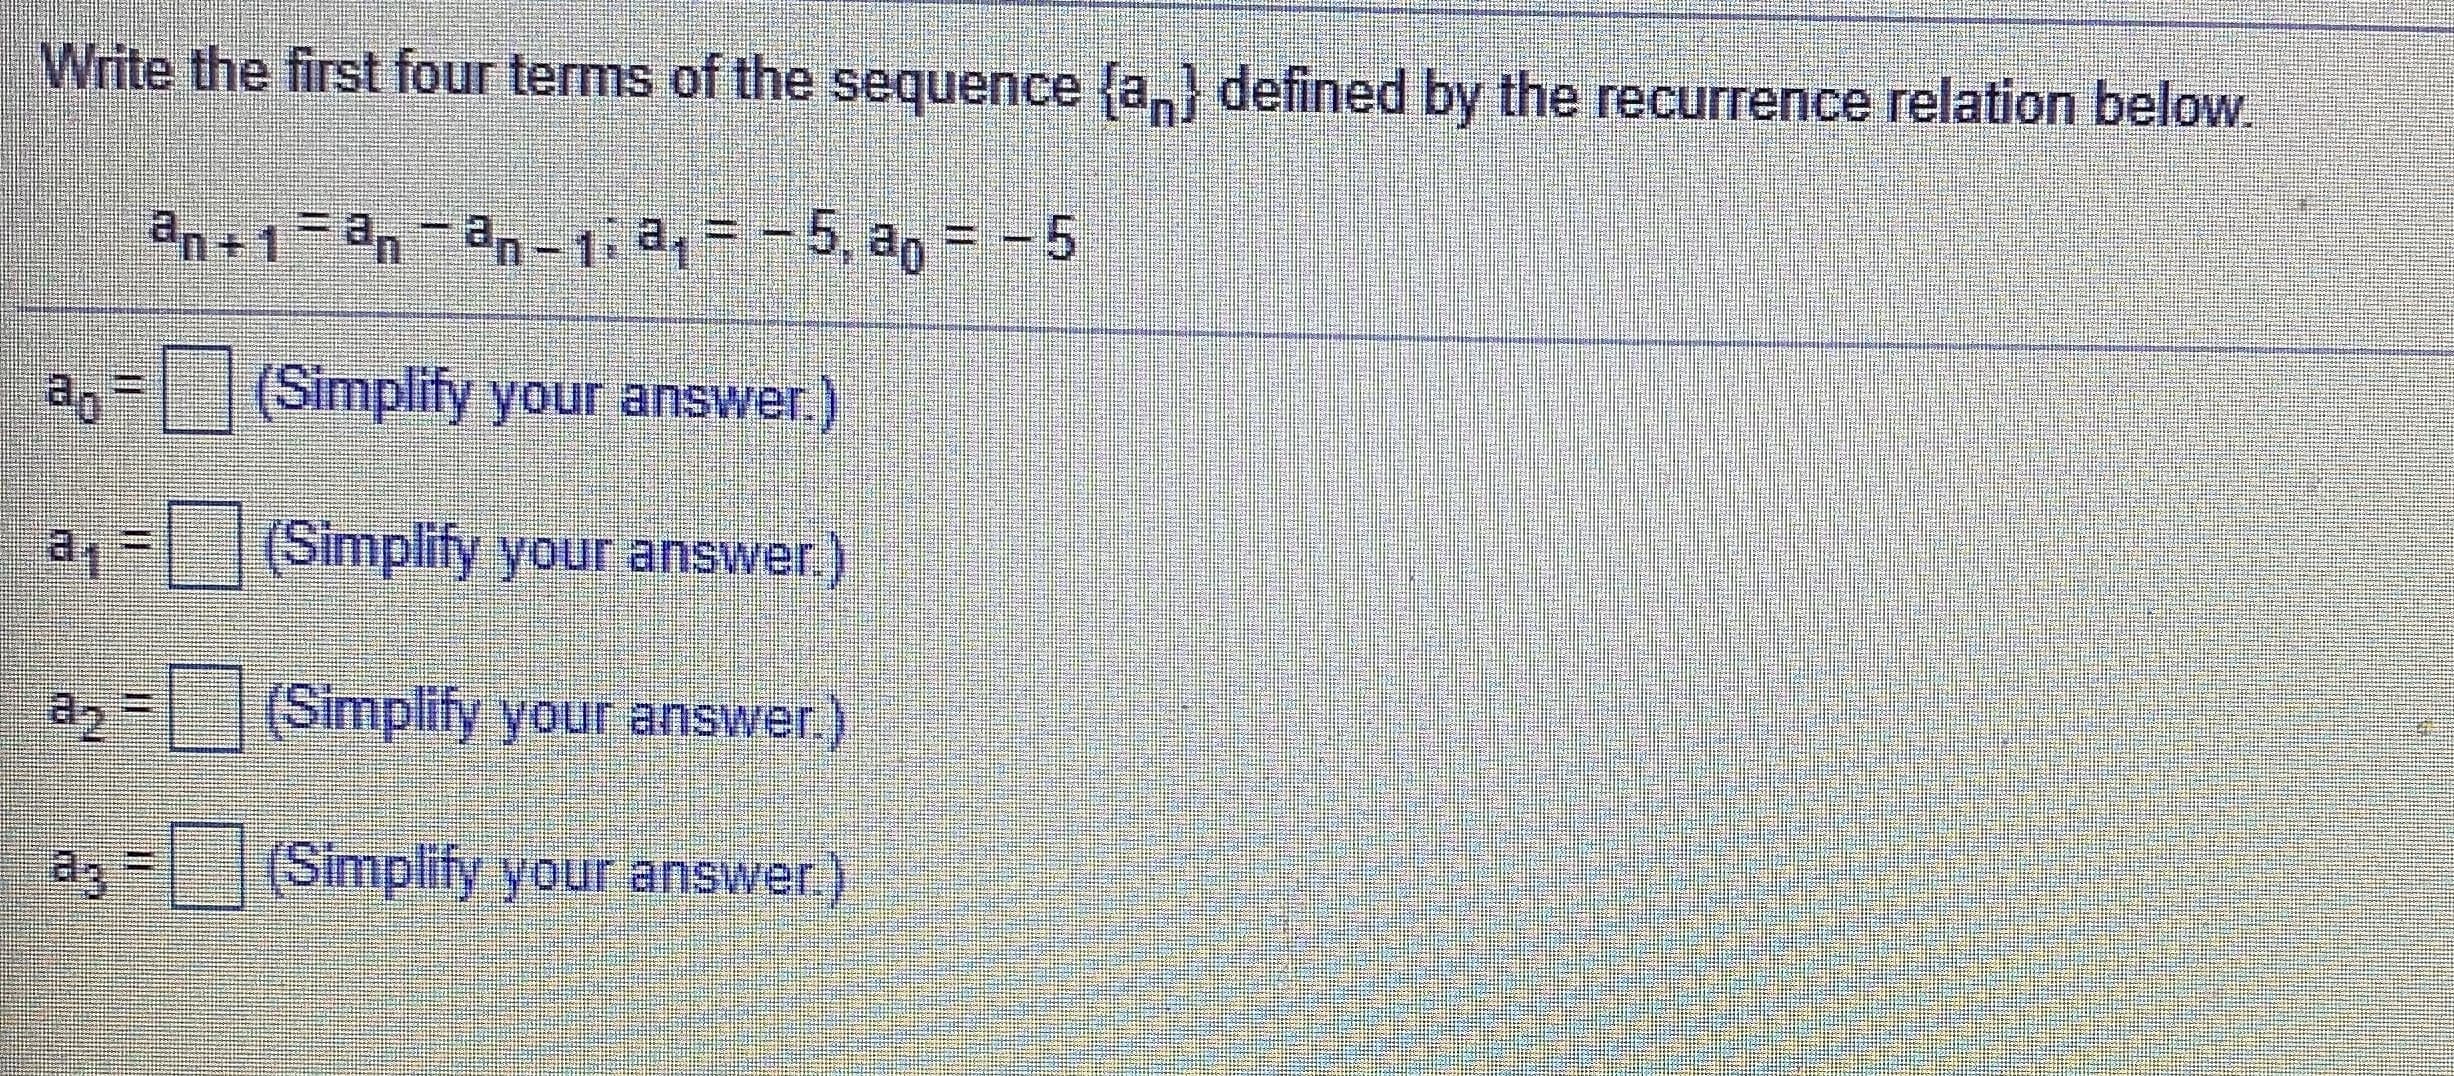 Write the first four terms of the sequence fa,} defined by the recurrence relation below.
an + 1=an-an-1 a, = - 5, ag = - 5
